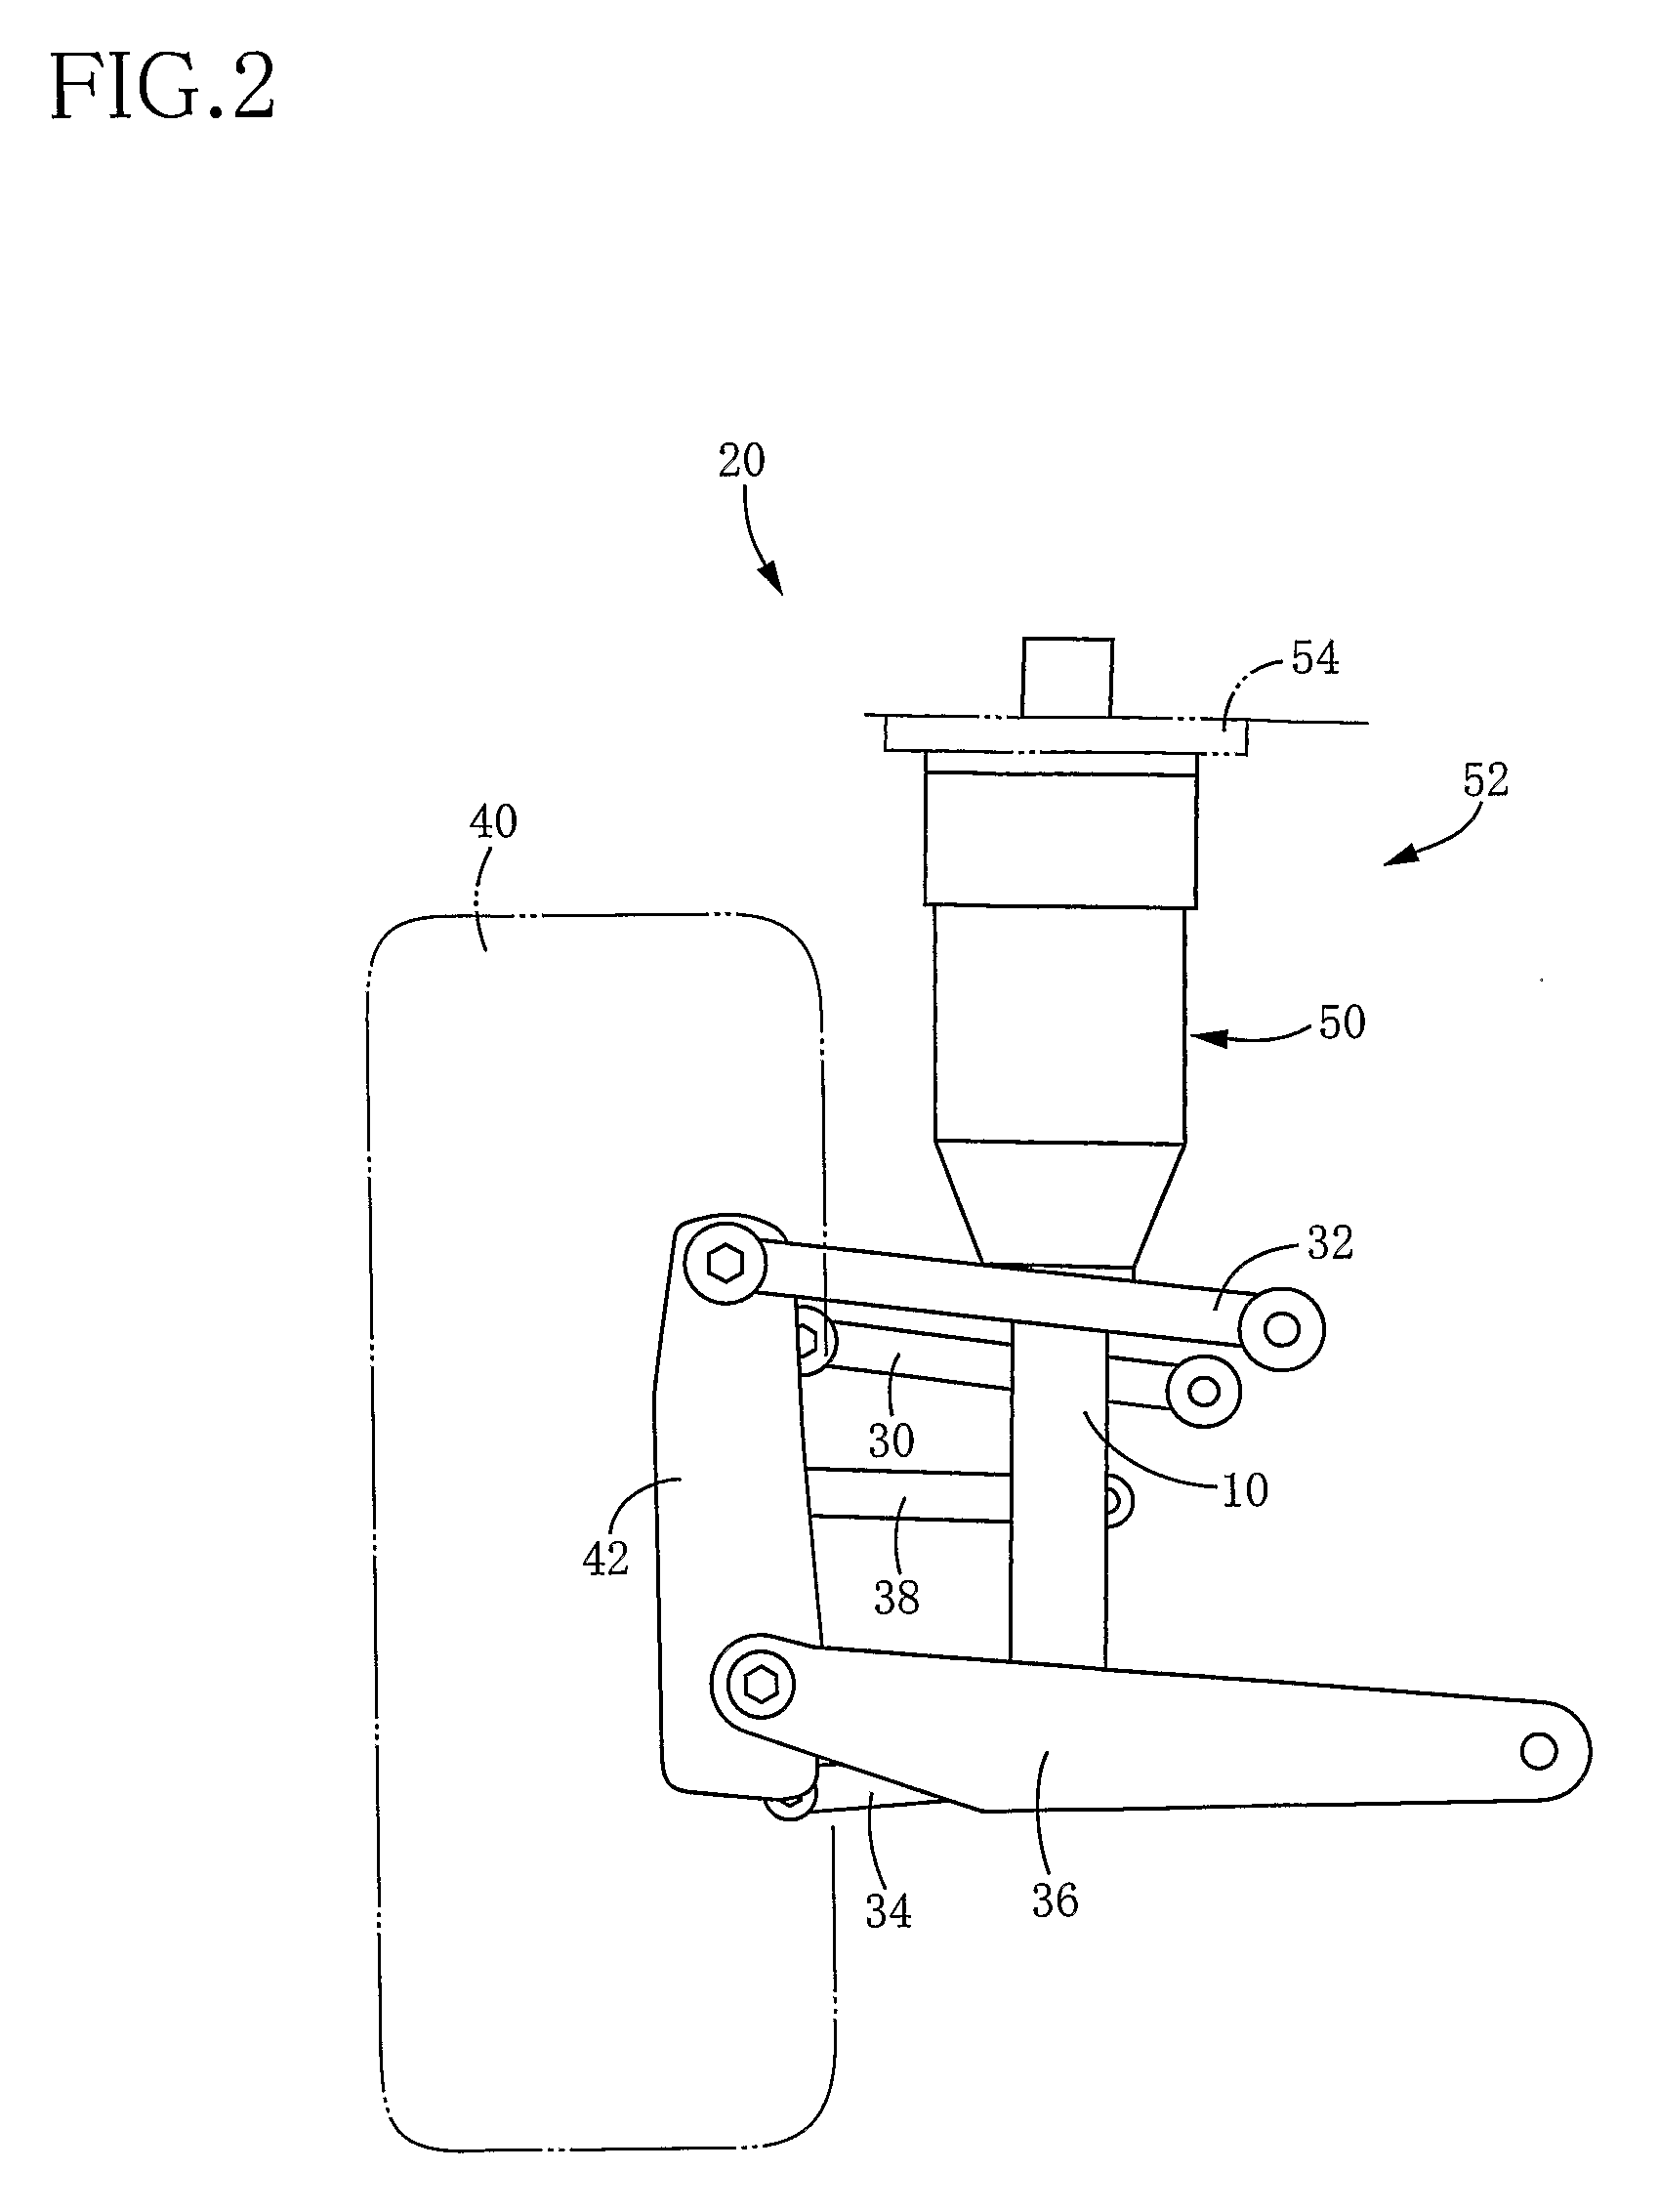 Electromagnetic shock absorber for vehicle